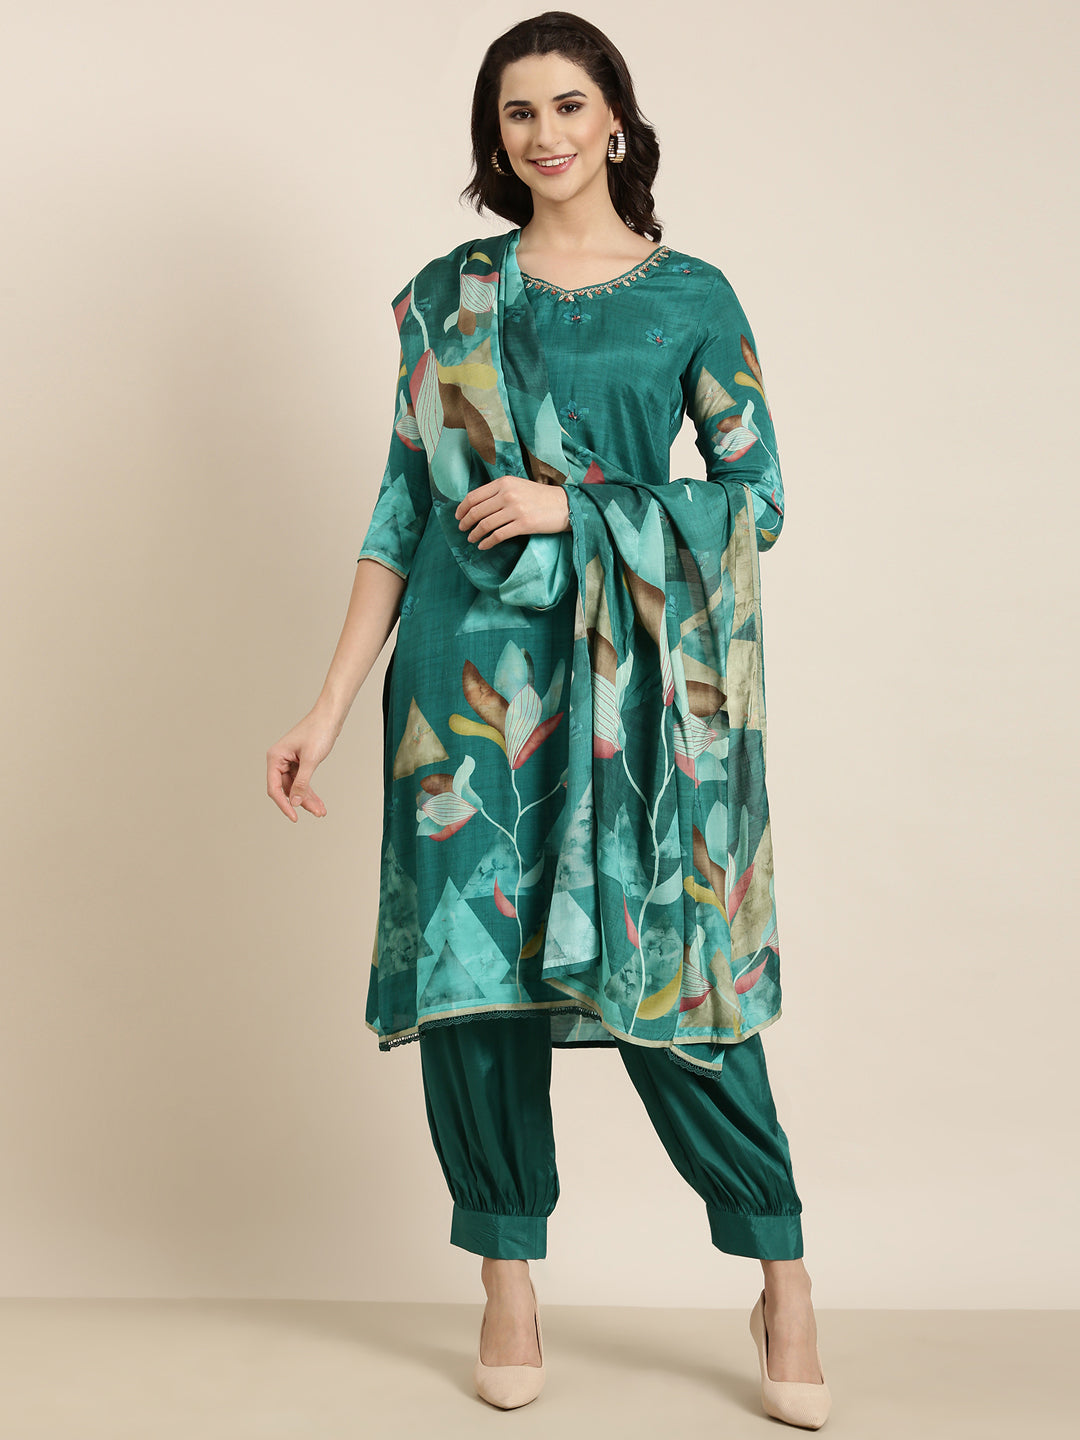 Women Straight Teal Floral Kurta and Patiala Set Comes With Dupatta